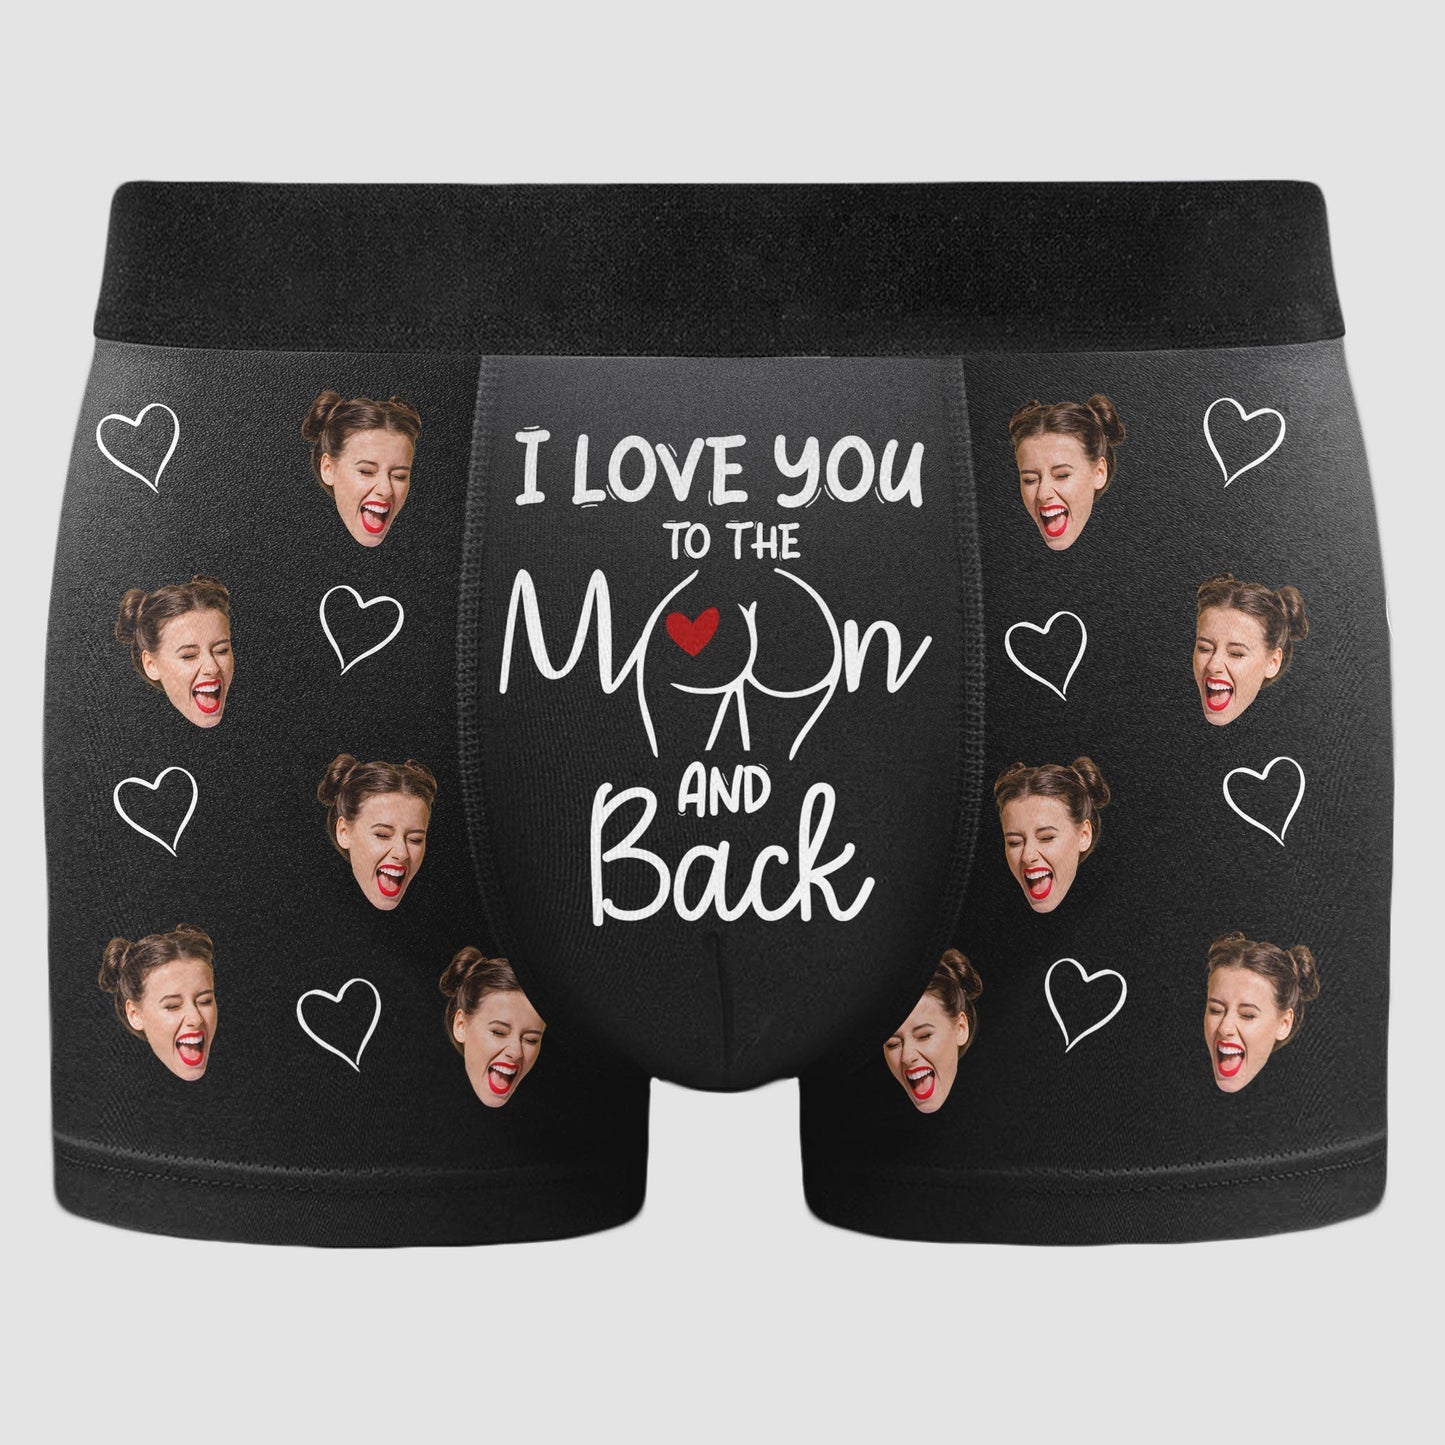 Love You To The Moon And Back Anniversary Gift - Personalized Photo Men's Boxer Briefs